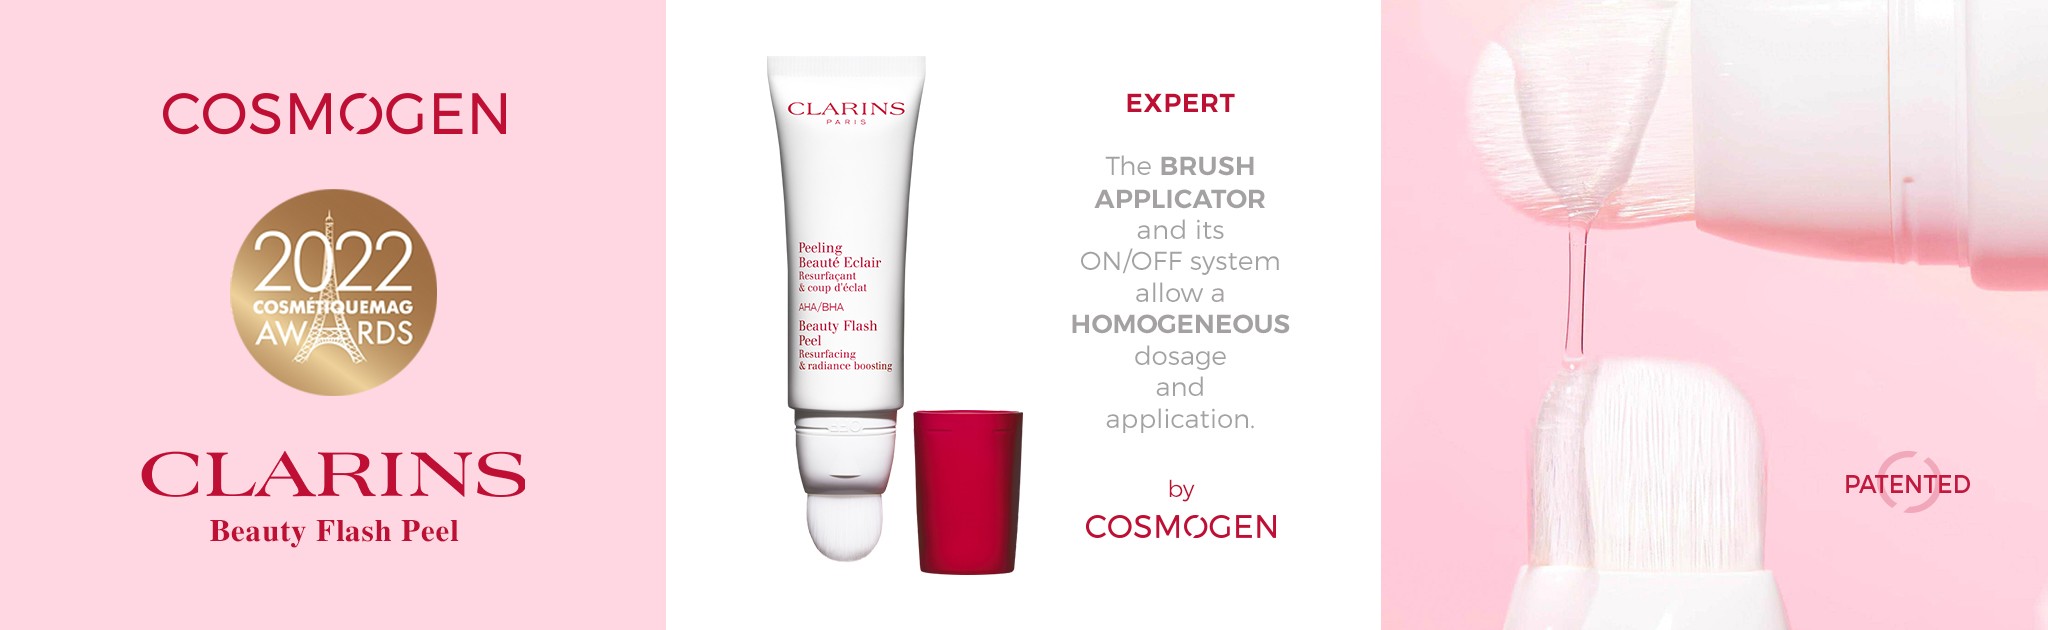 https://www.cosmogen.fr/d30-refillable-squeeze-n-tint.html?search_query=squeeze%27n+tint&results=9&utm_source=sendinblue&utm_campaign=CLARINS%20WINNER%20OF%20THE%20COSMETIQUEMAG%20AWARDS%202022_EN&utm_medium=email